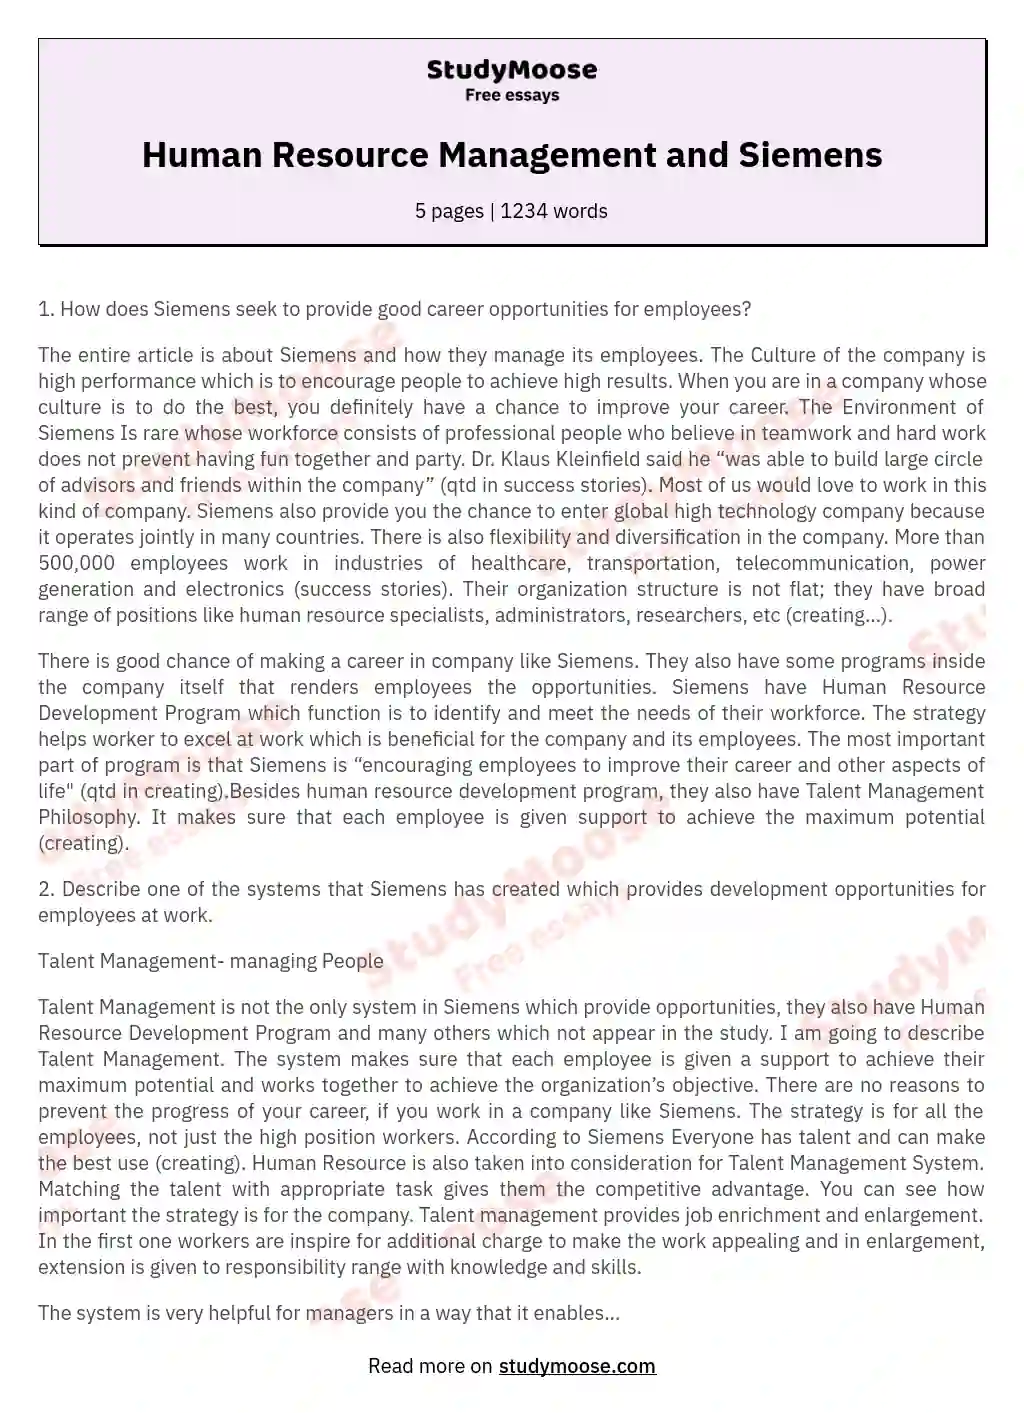 example of human resource management essay